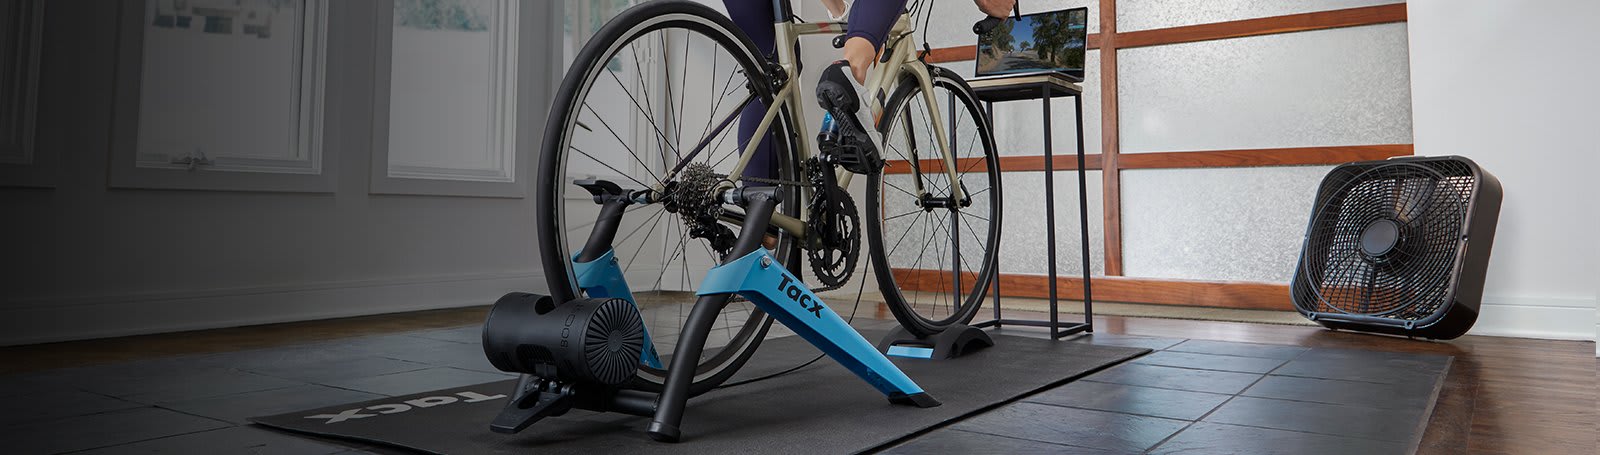 Tacx Cycletrainer Booster 2019 Rollentrainer 